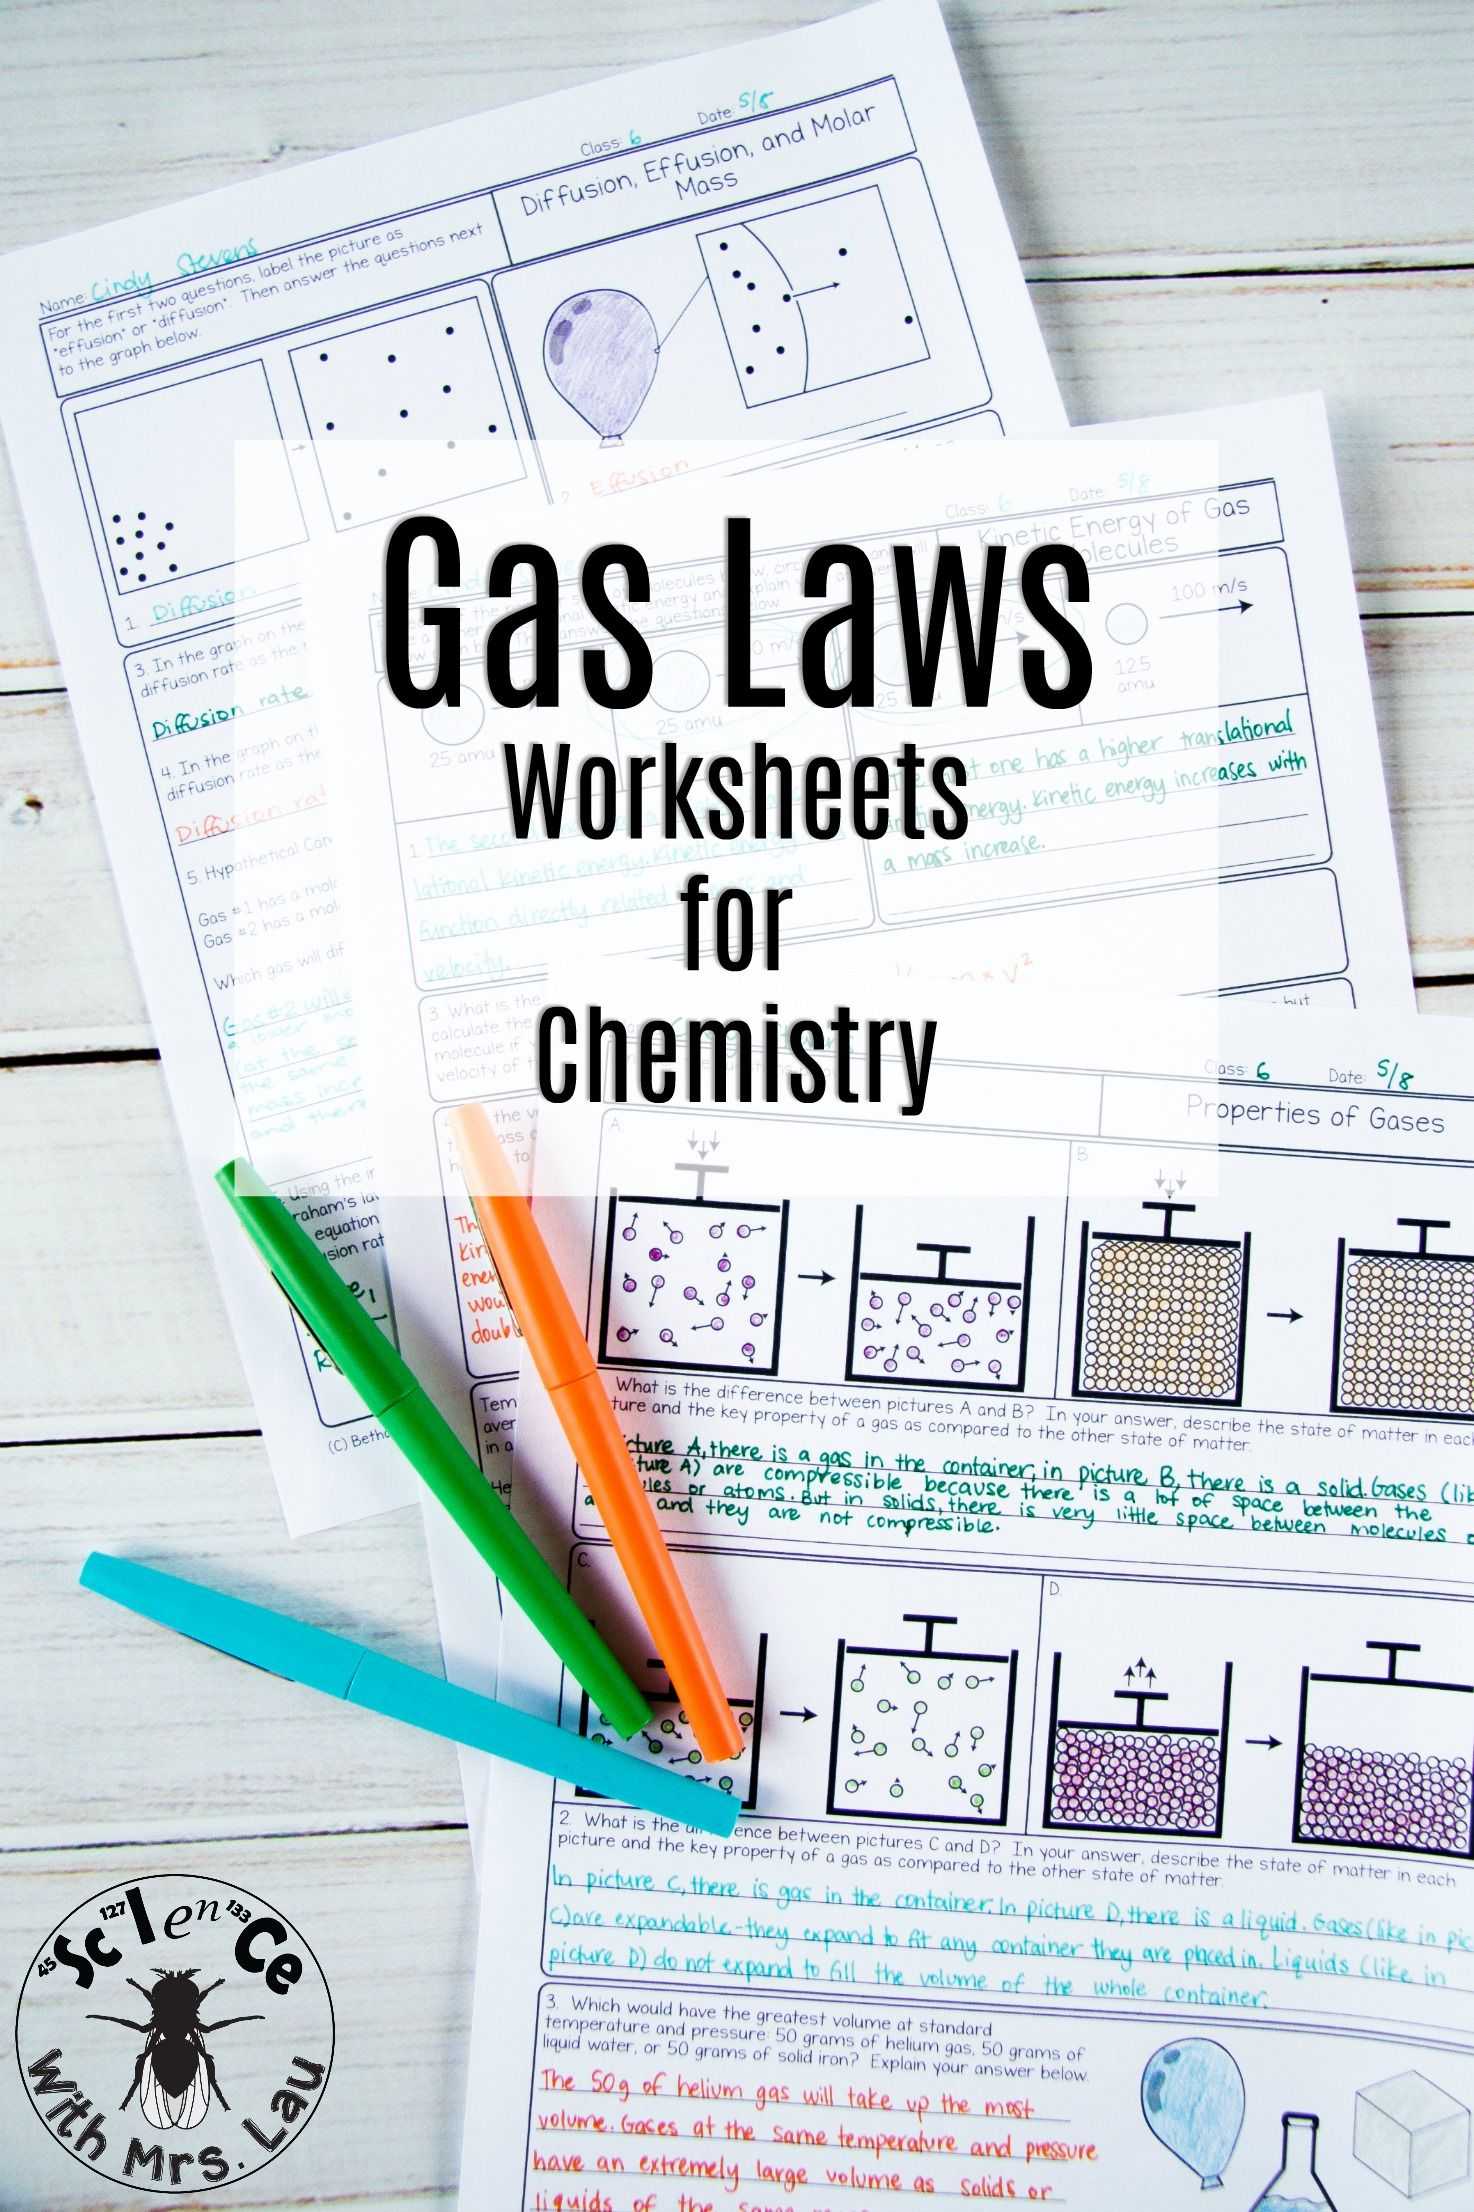 The Gas Laws Worksheet Along with Gas Laws Chemistry Homework Pages